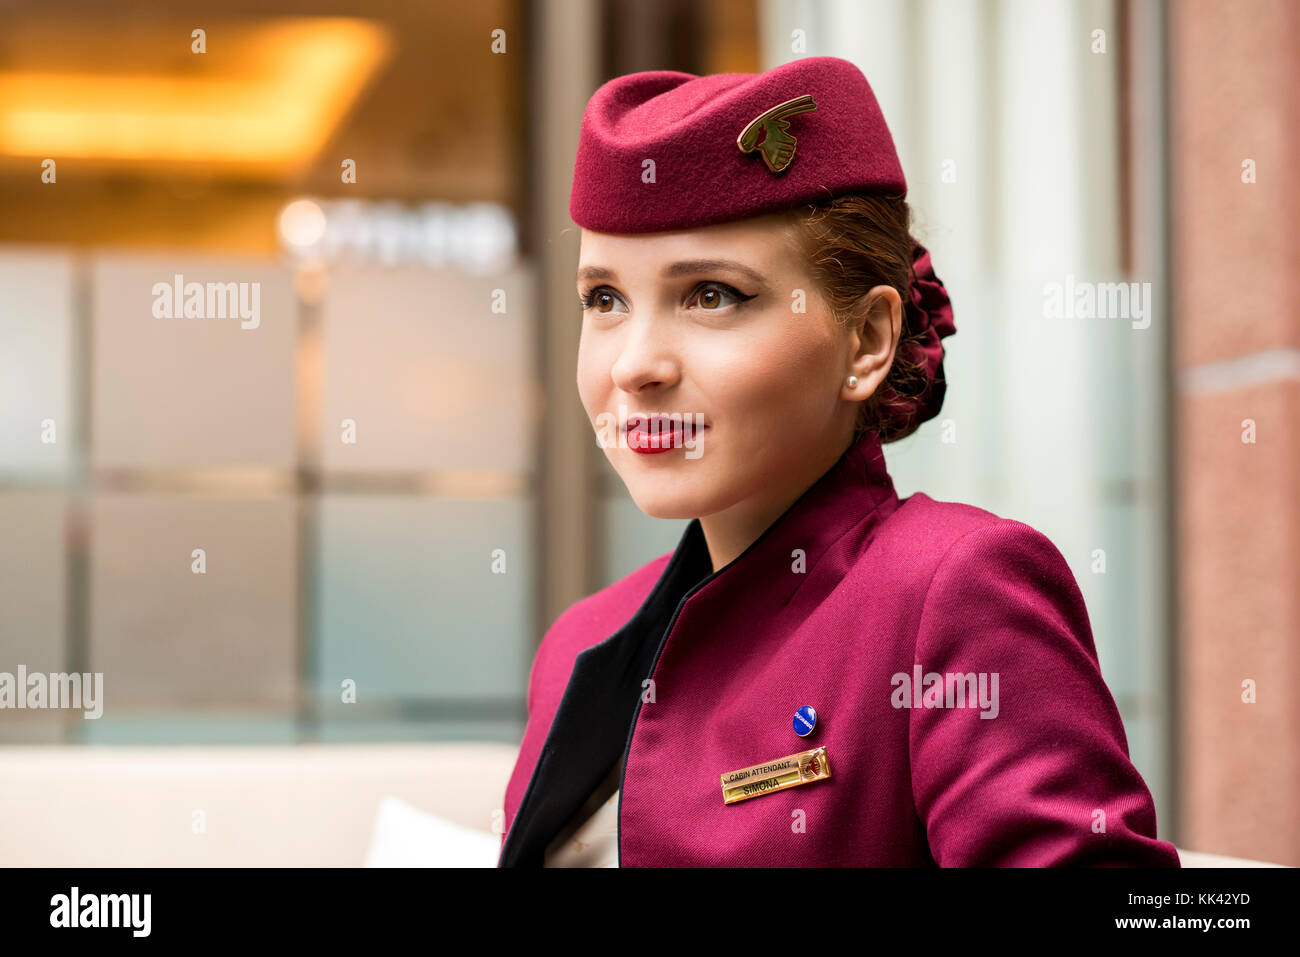 young-attractive-female-working-as-cabin-crew-for-qatar-airways-on-KK42YD.jpg